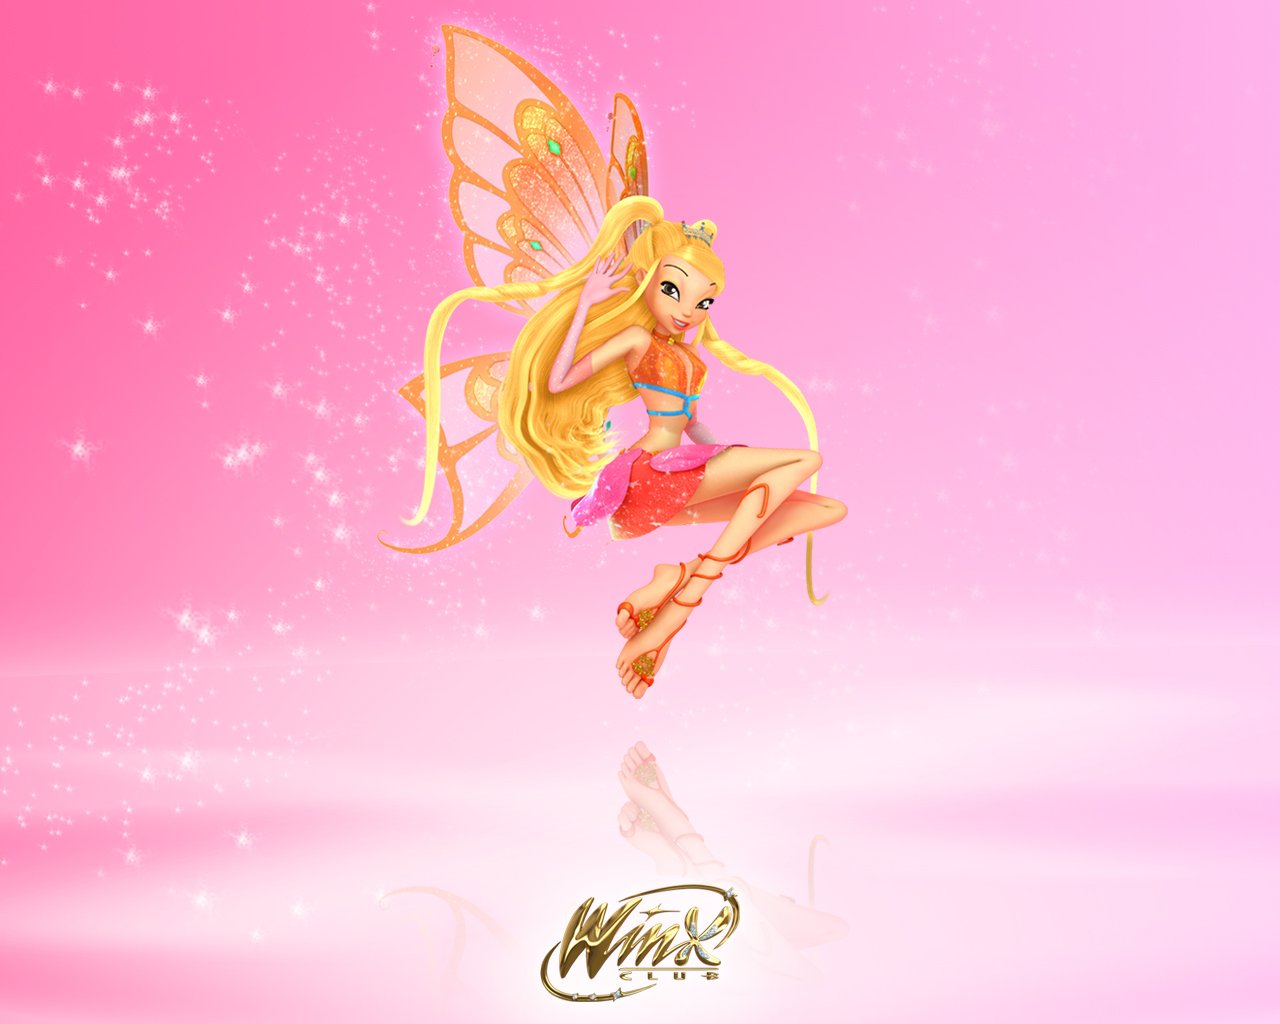 Winx Club Free Desktop Wallpapers for HD Widescreen and